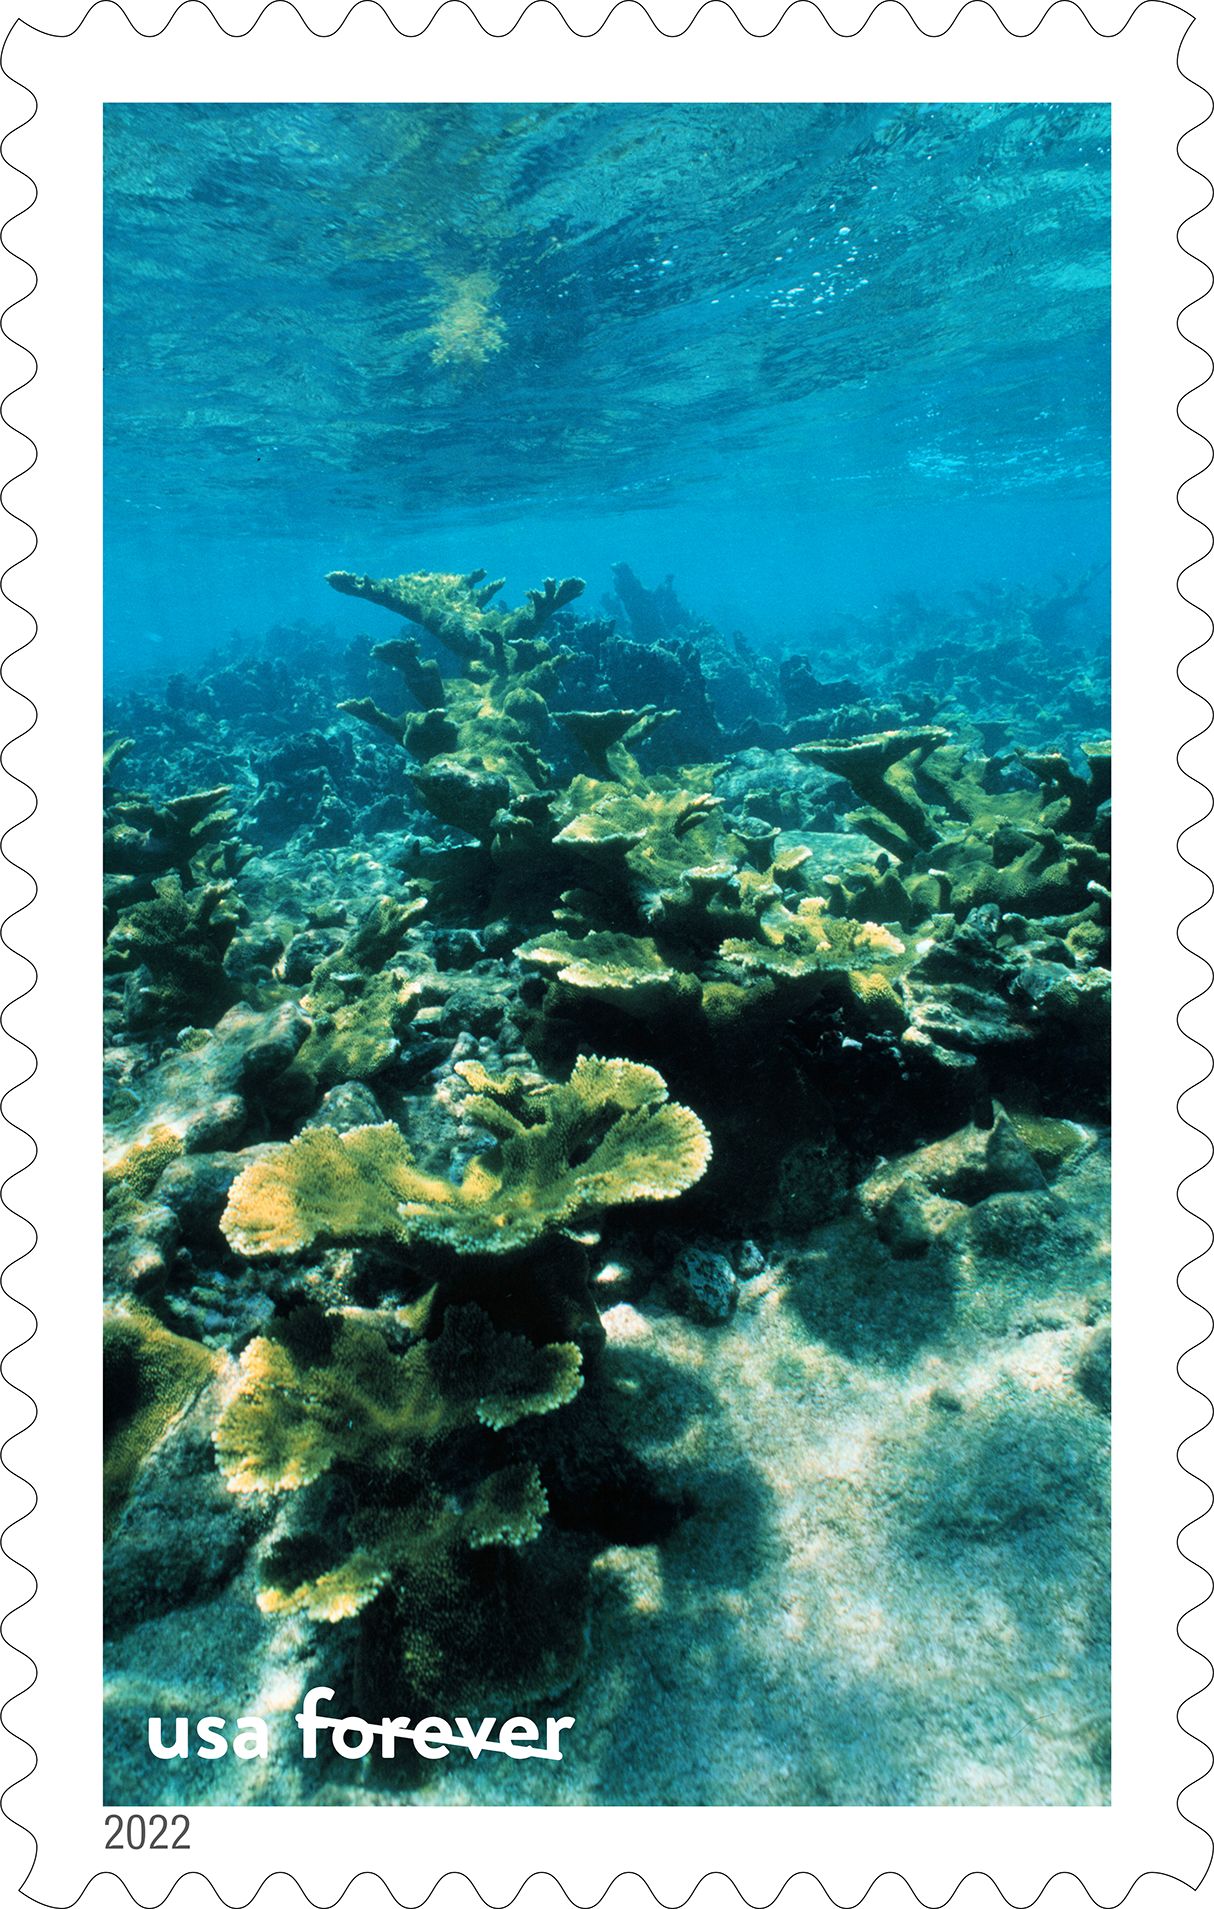 USPS issues postcard stamps featuring coral reefs - Newsroom 